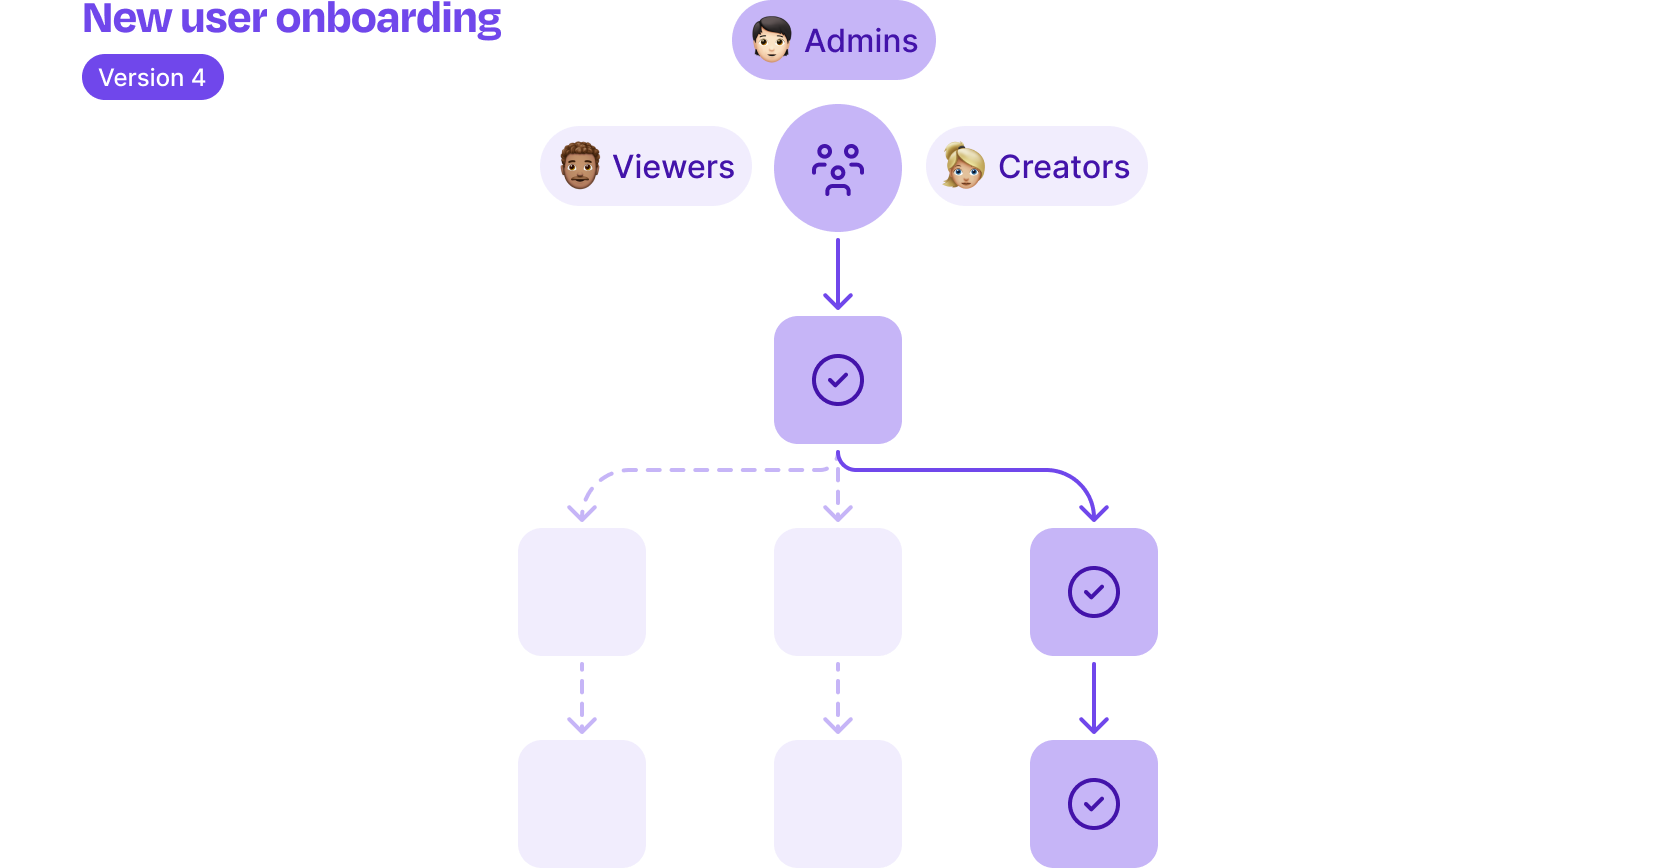 A flow diagram showing targeting of admins, viewers, and creators